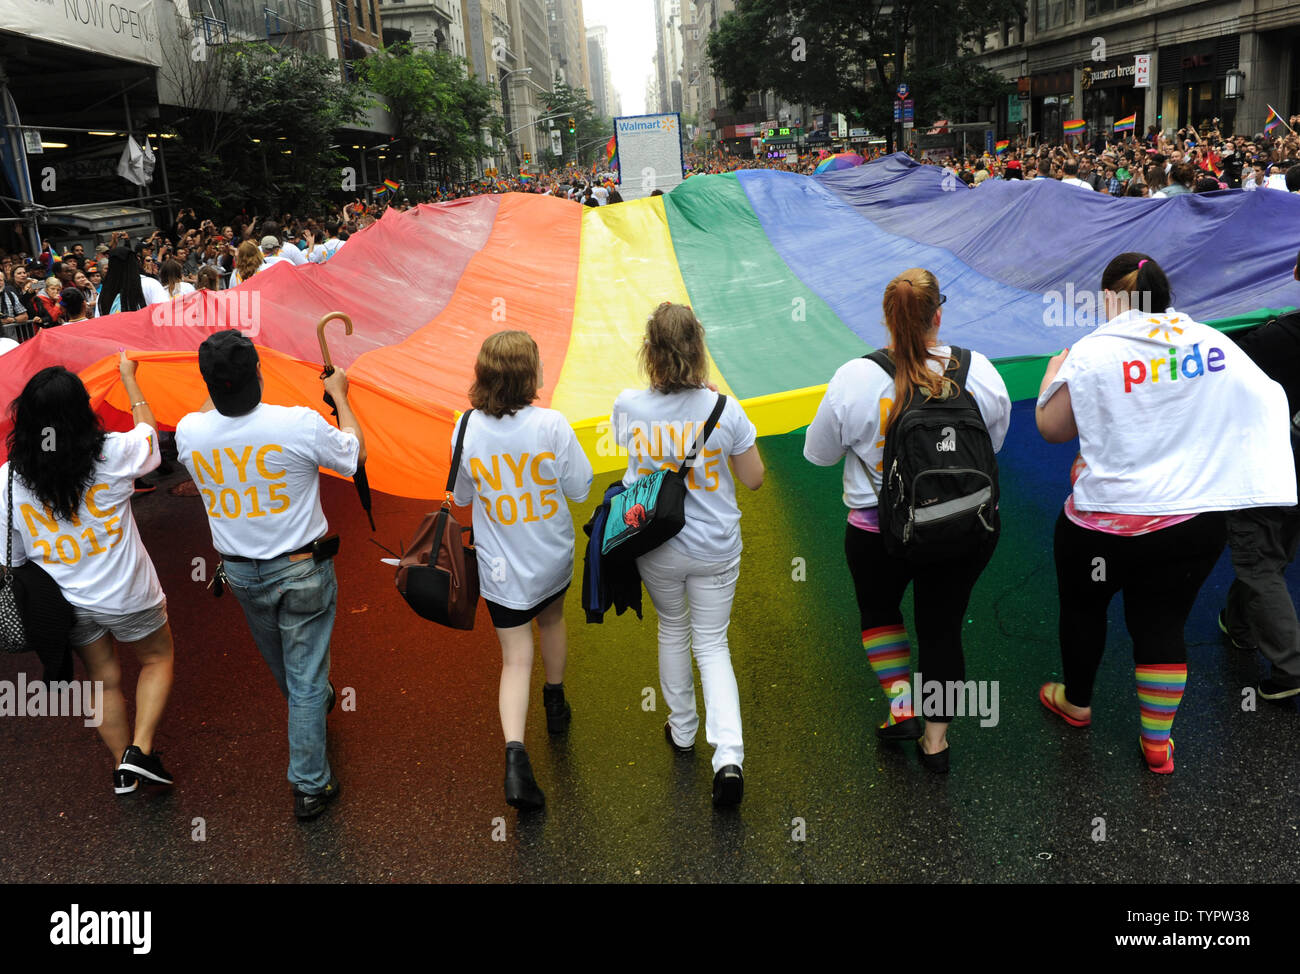 Participants march carrying a giant Rainbow Flag at the 2015 NYC Gay Pride March in New York City on June 28, 2015. The parade comes 2 days after the US Supreme Court rules gay marriage is legal nationwide The ruling, which sparked celebrations outside the court in Washington DC, brings to an end more than a decade of bitter legal battles.       Photo by Dennis Van Tine/UPI Stock Photo